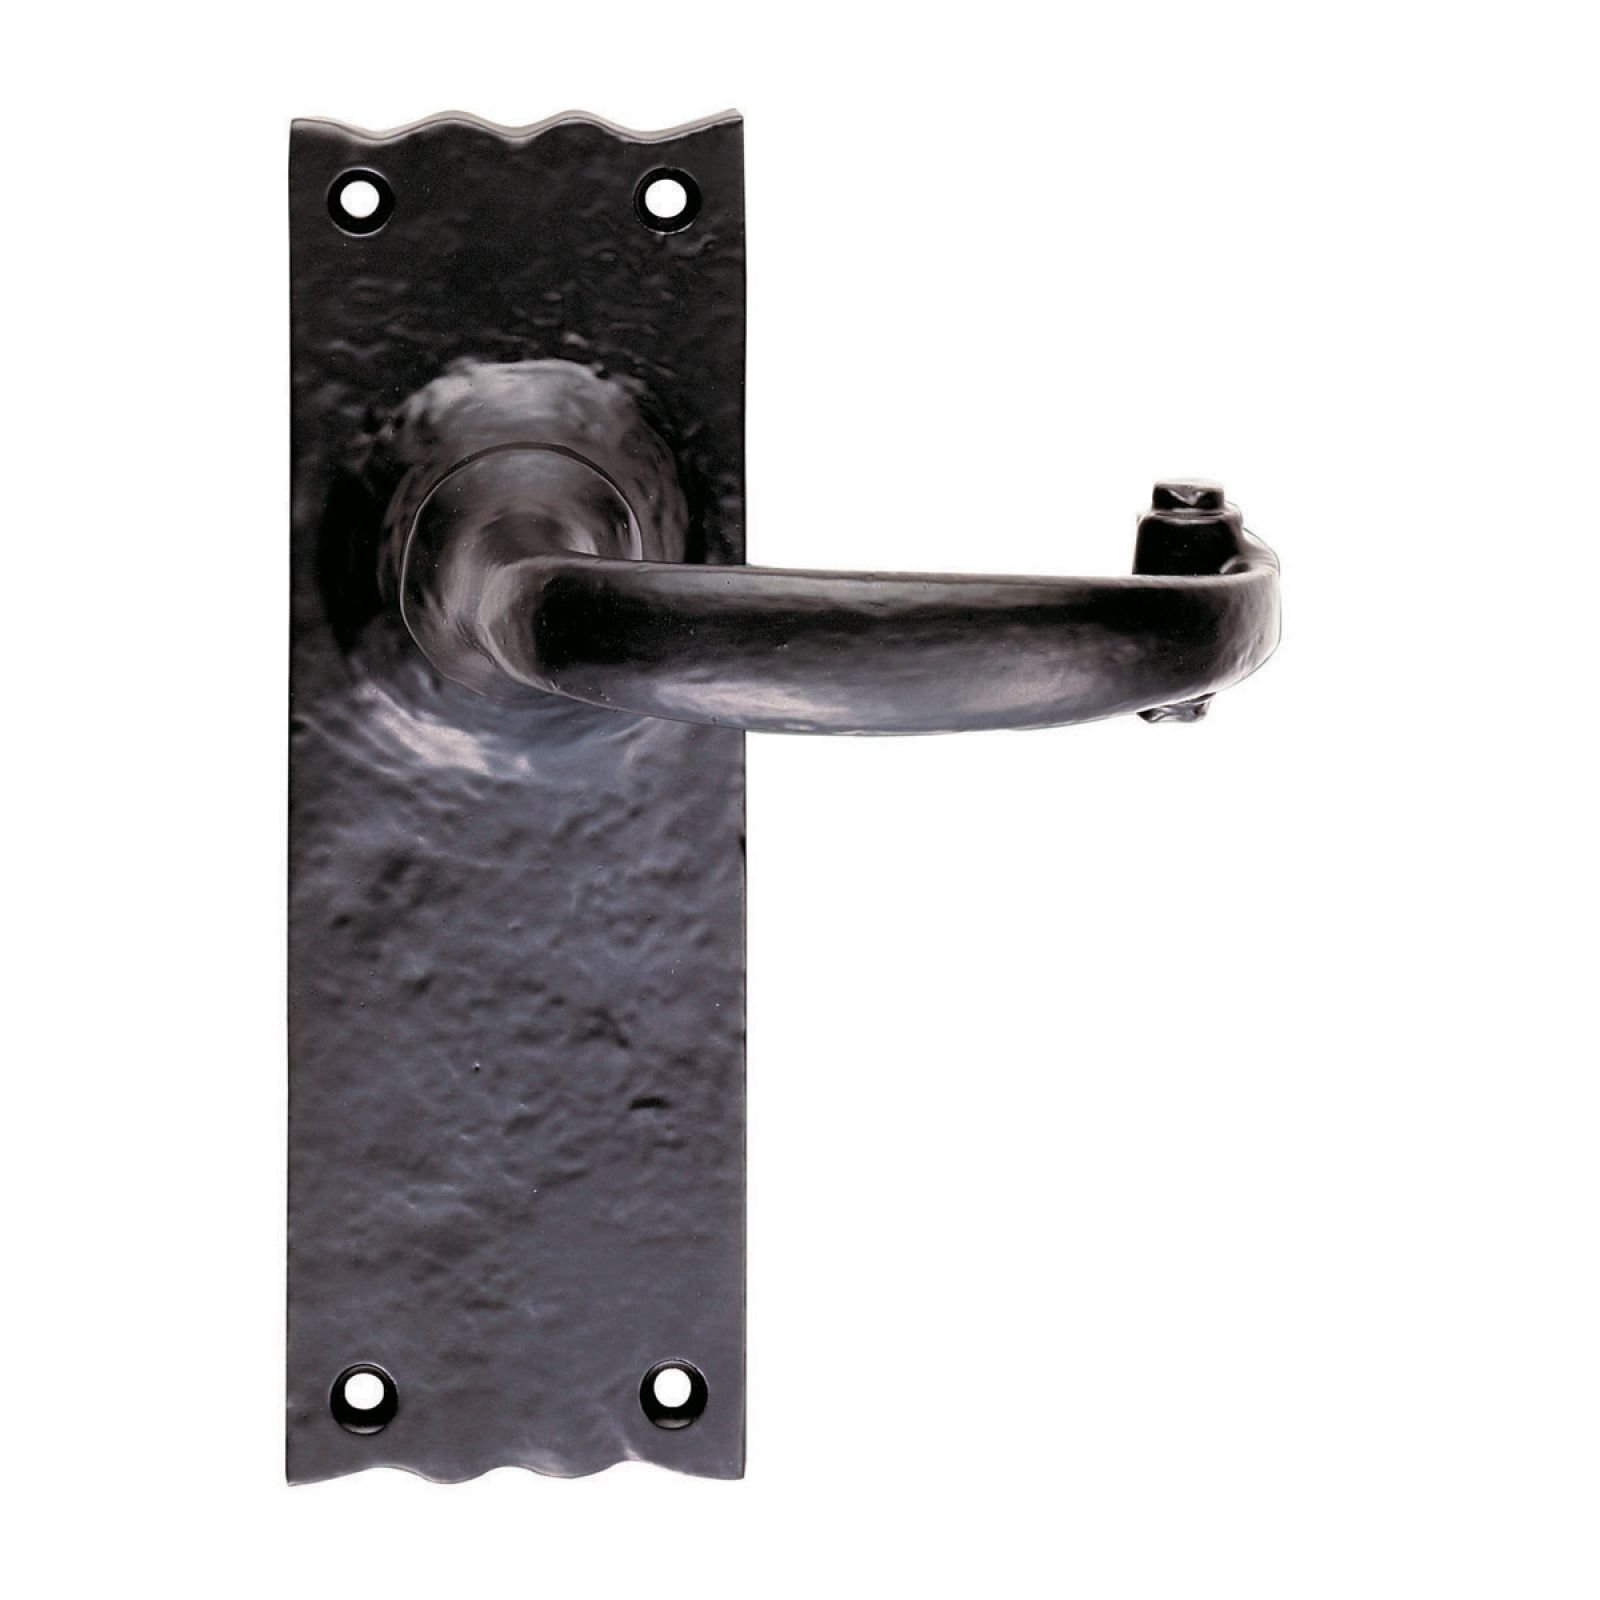 Traditional lever latch handle